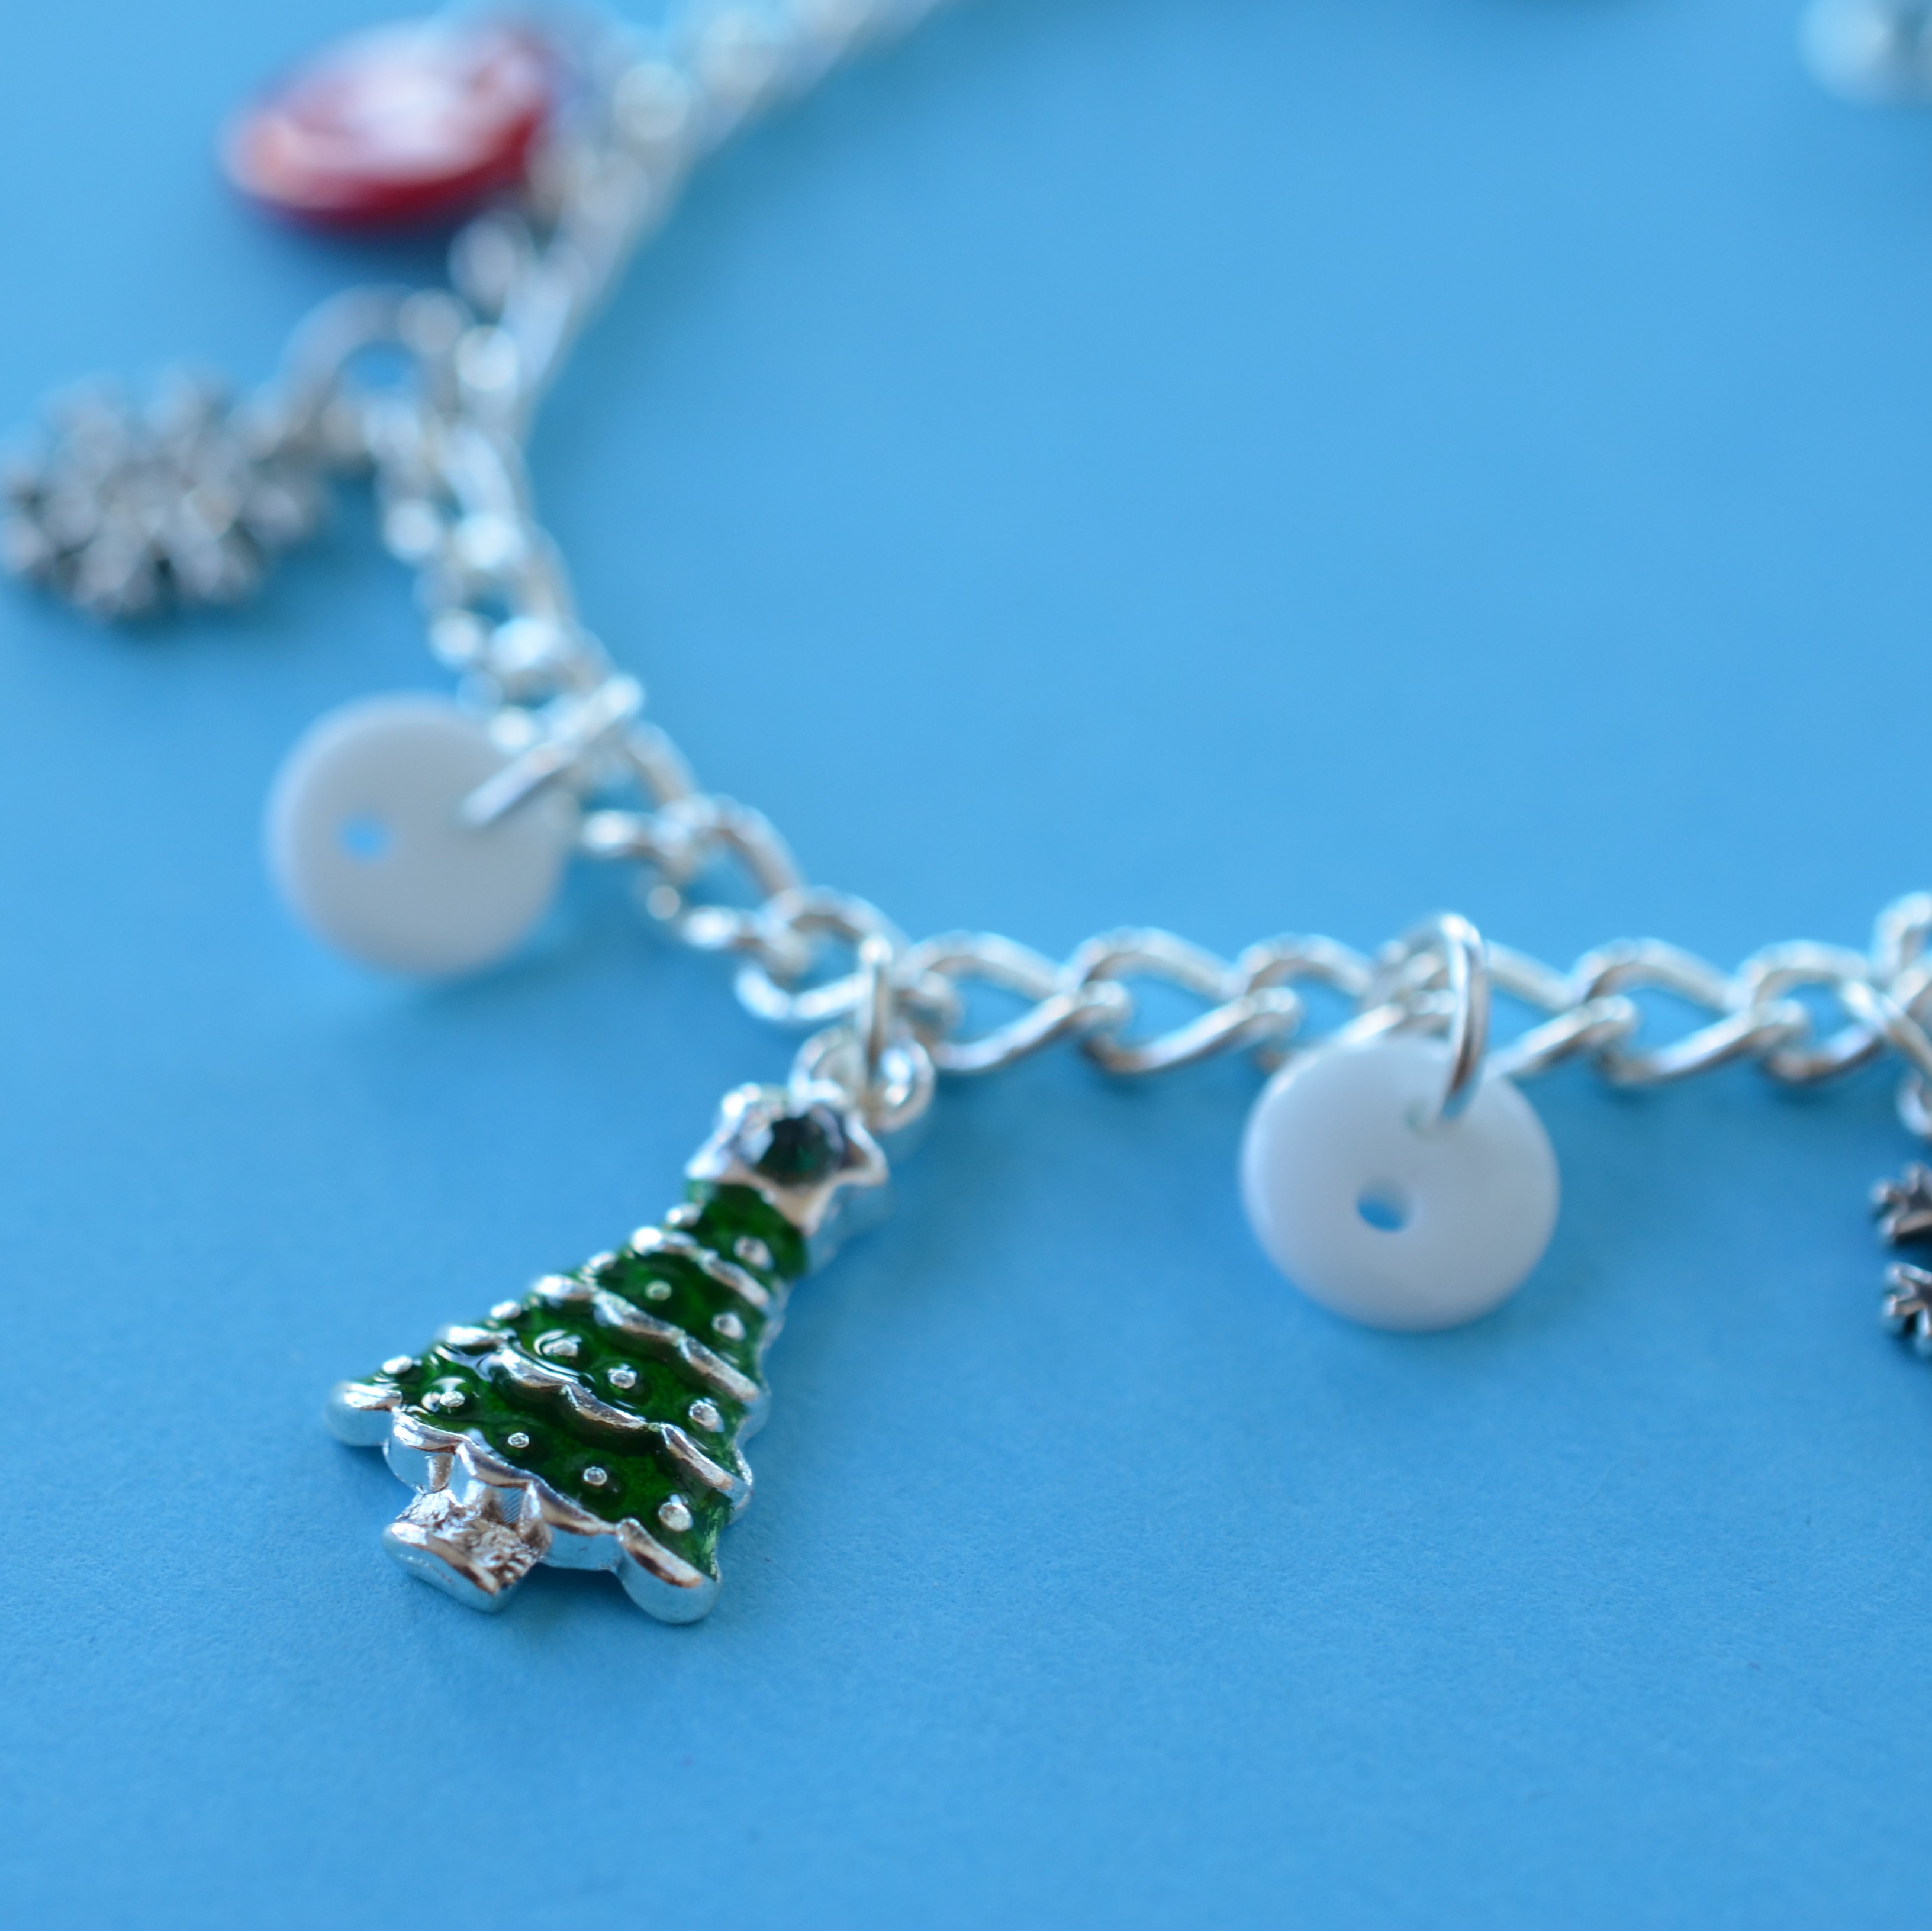 Christmas Tree Children's Festive Button Charm Bracelet Available in Choice of Colours